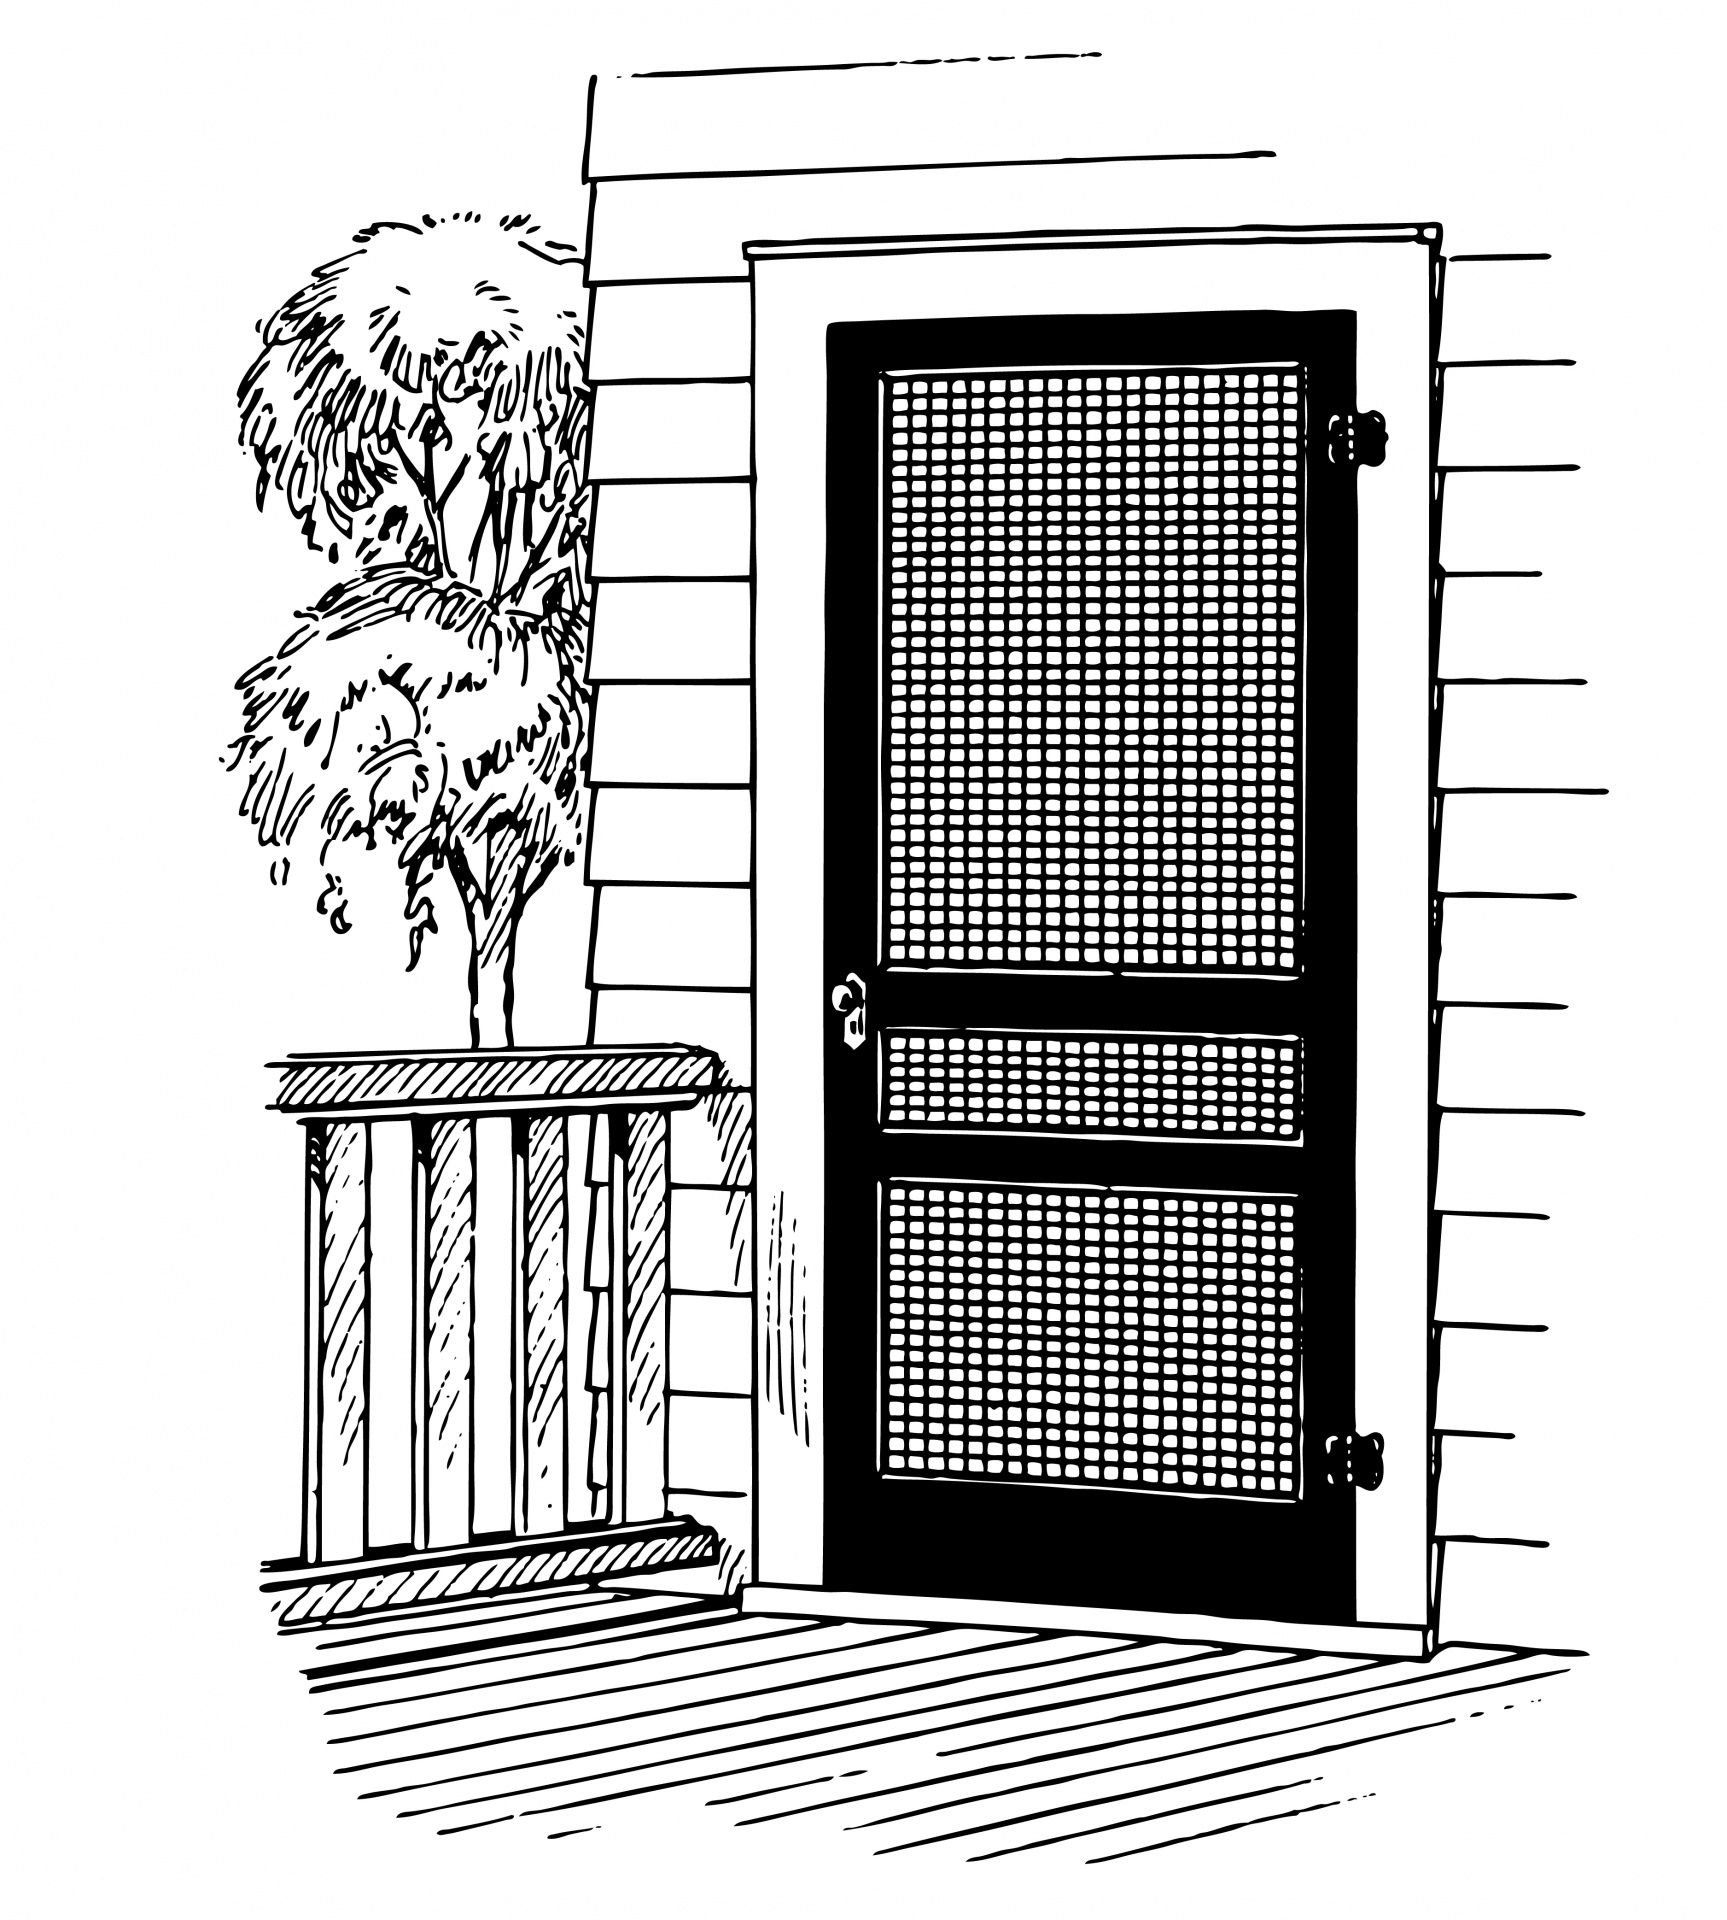 Illustration of a screen door and porch